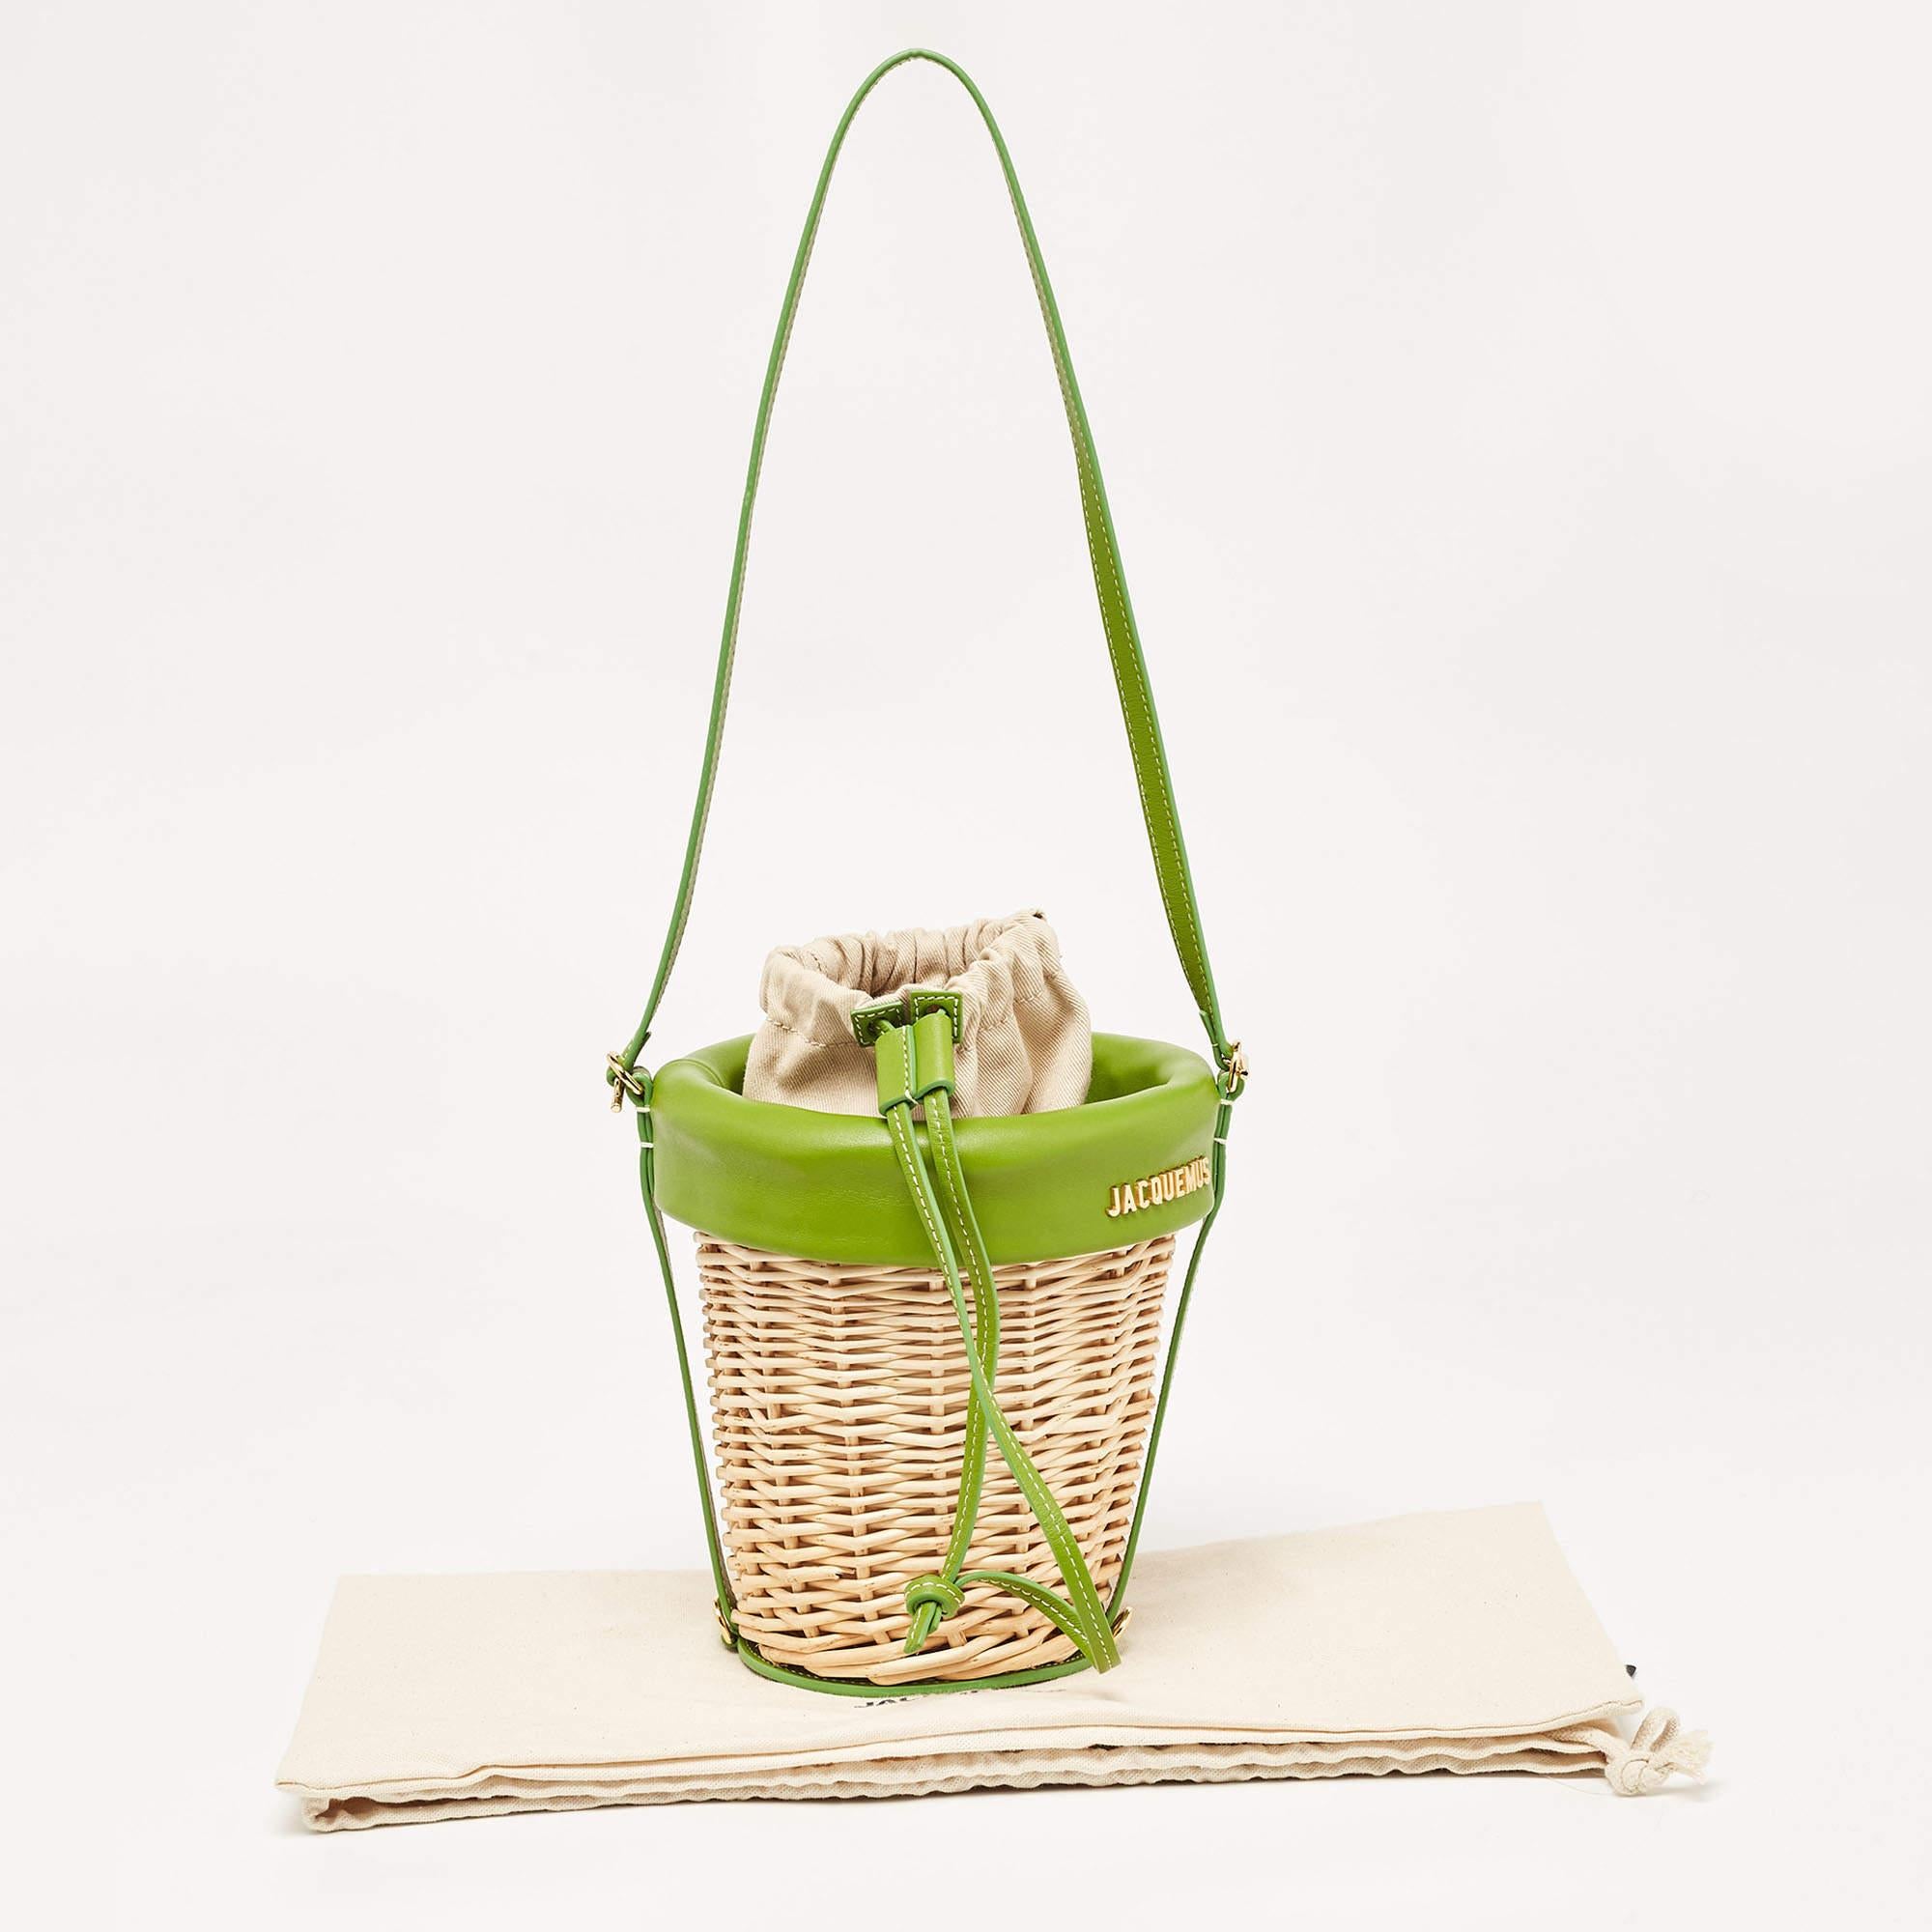 Jacquemus Green/Natural Wicker and Leather Le Panier Seau Bucket Bag 8